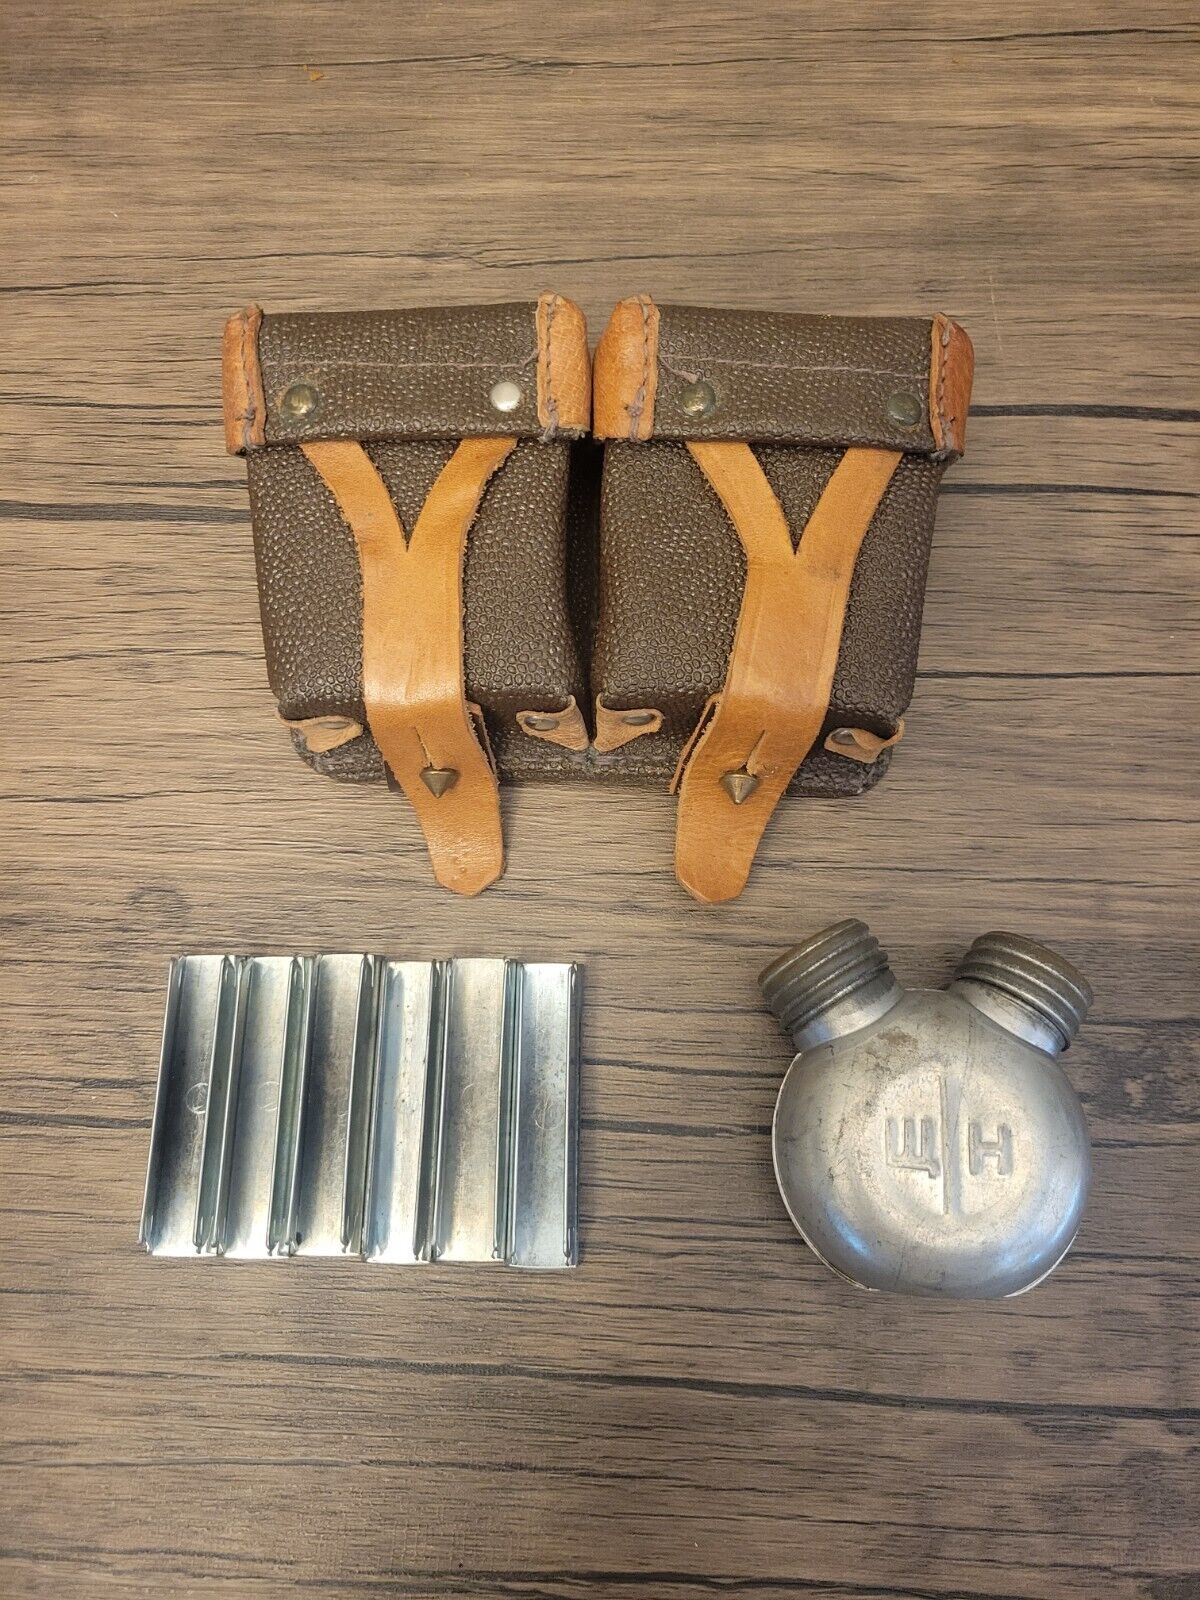 Original Soviet Mosin-Nagant Ammo Pouch and Stripper Clips with Oil Bottle Used